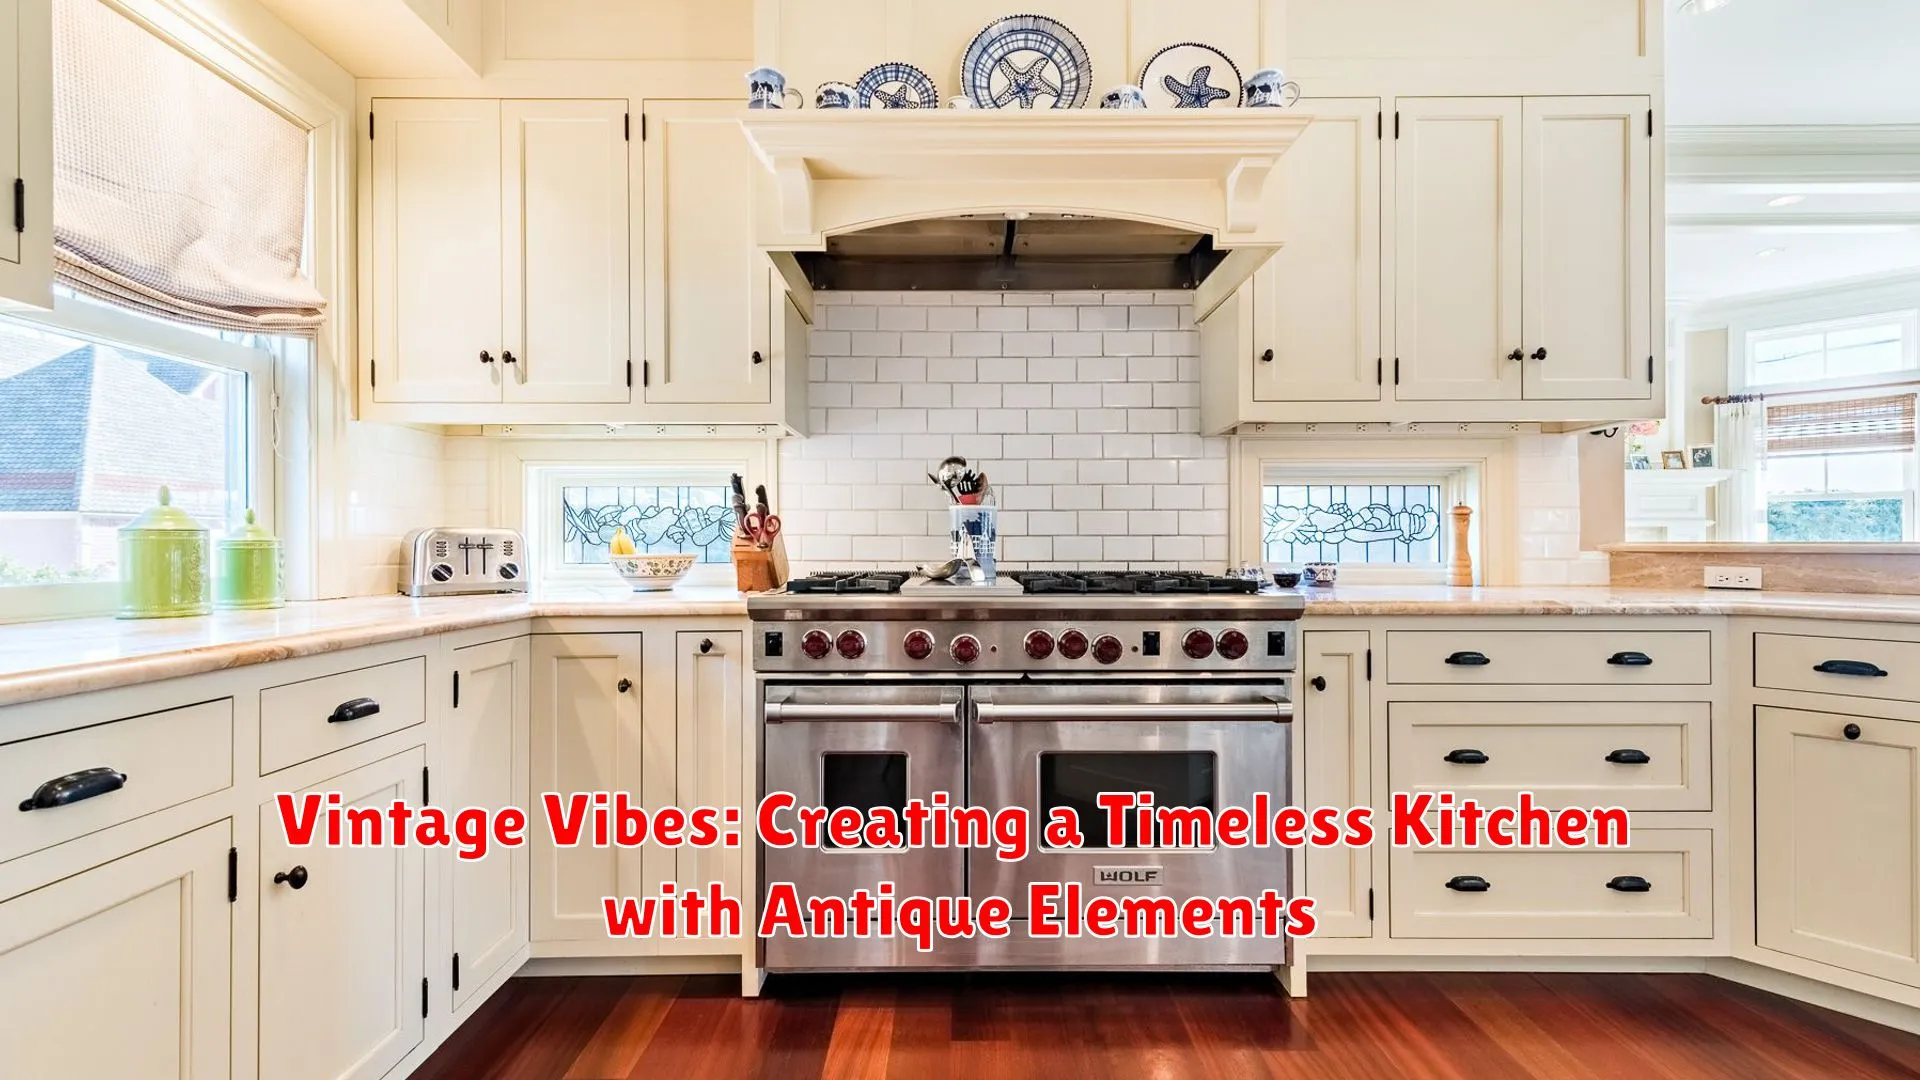 Vintage Vibes: Creating a Timeless Kitchen with Antique Elements